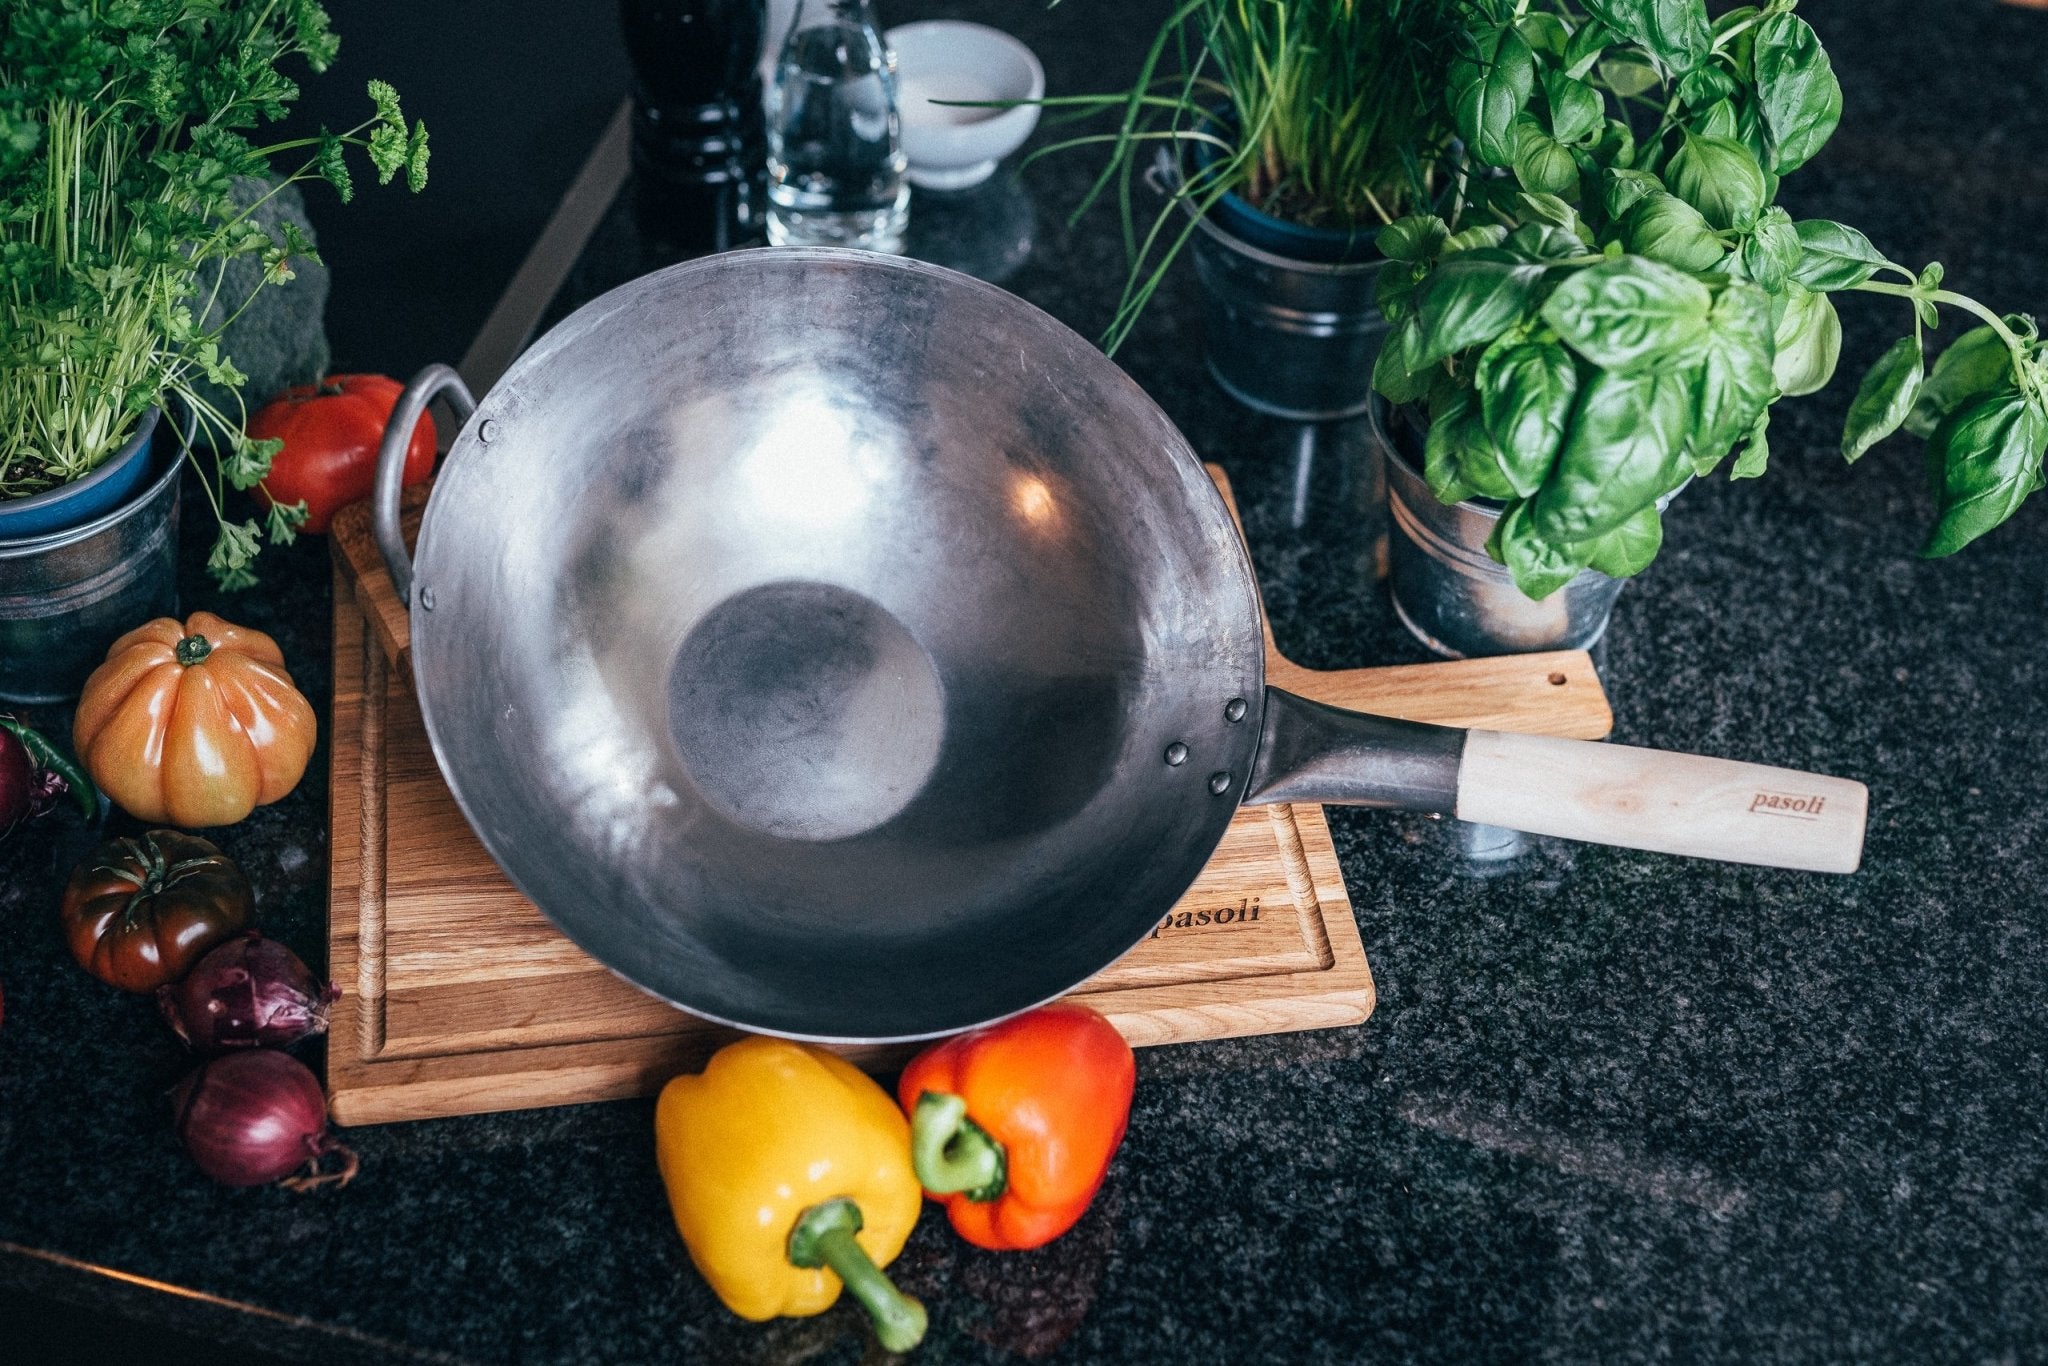 What do I need to keep in mind when cleaning my wok? – pasoli